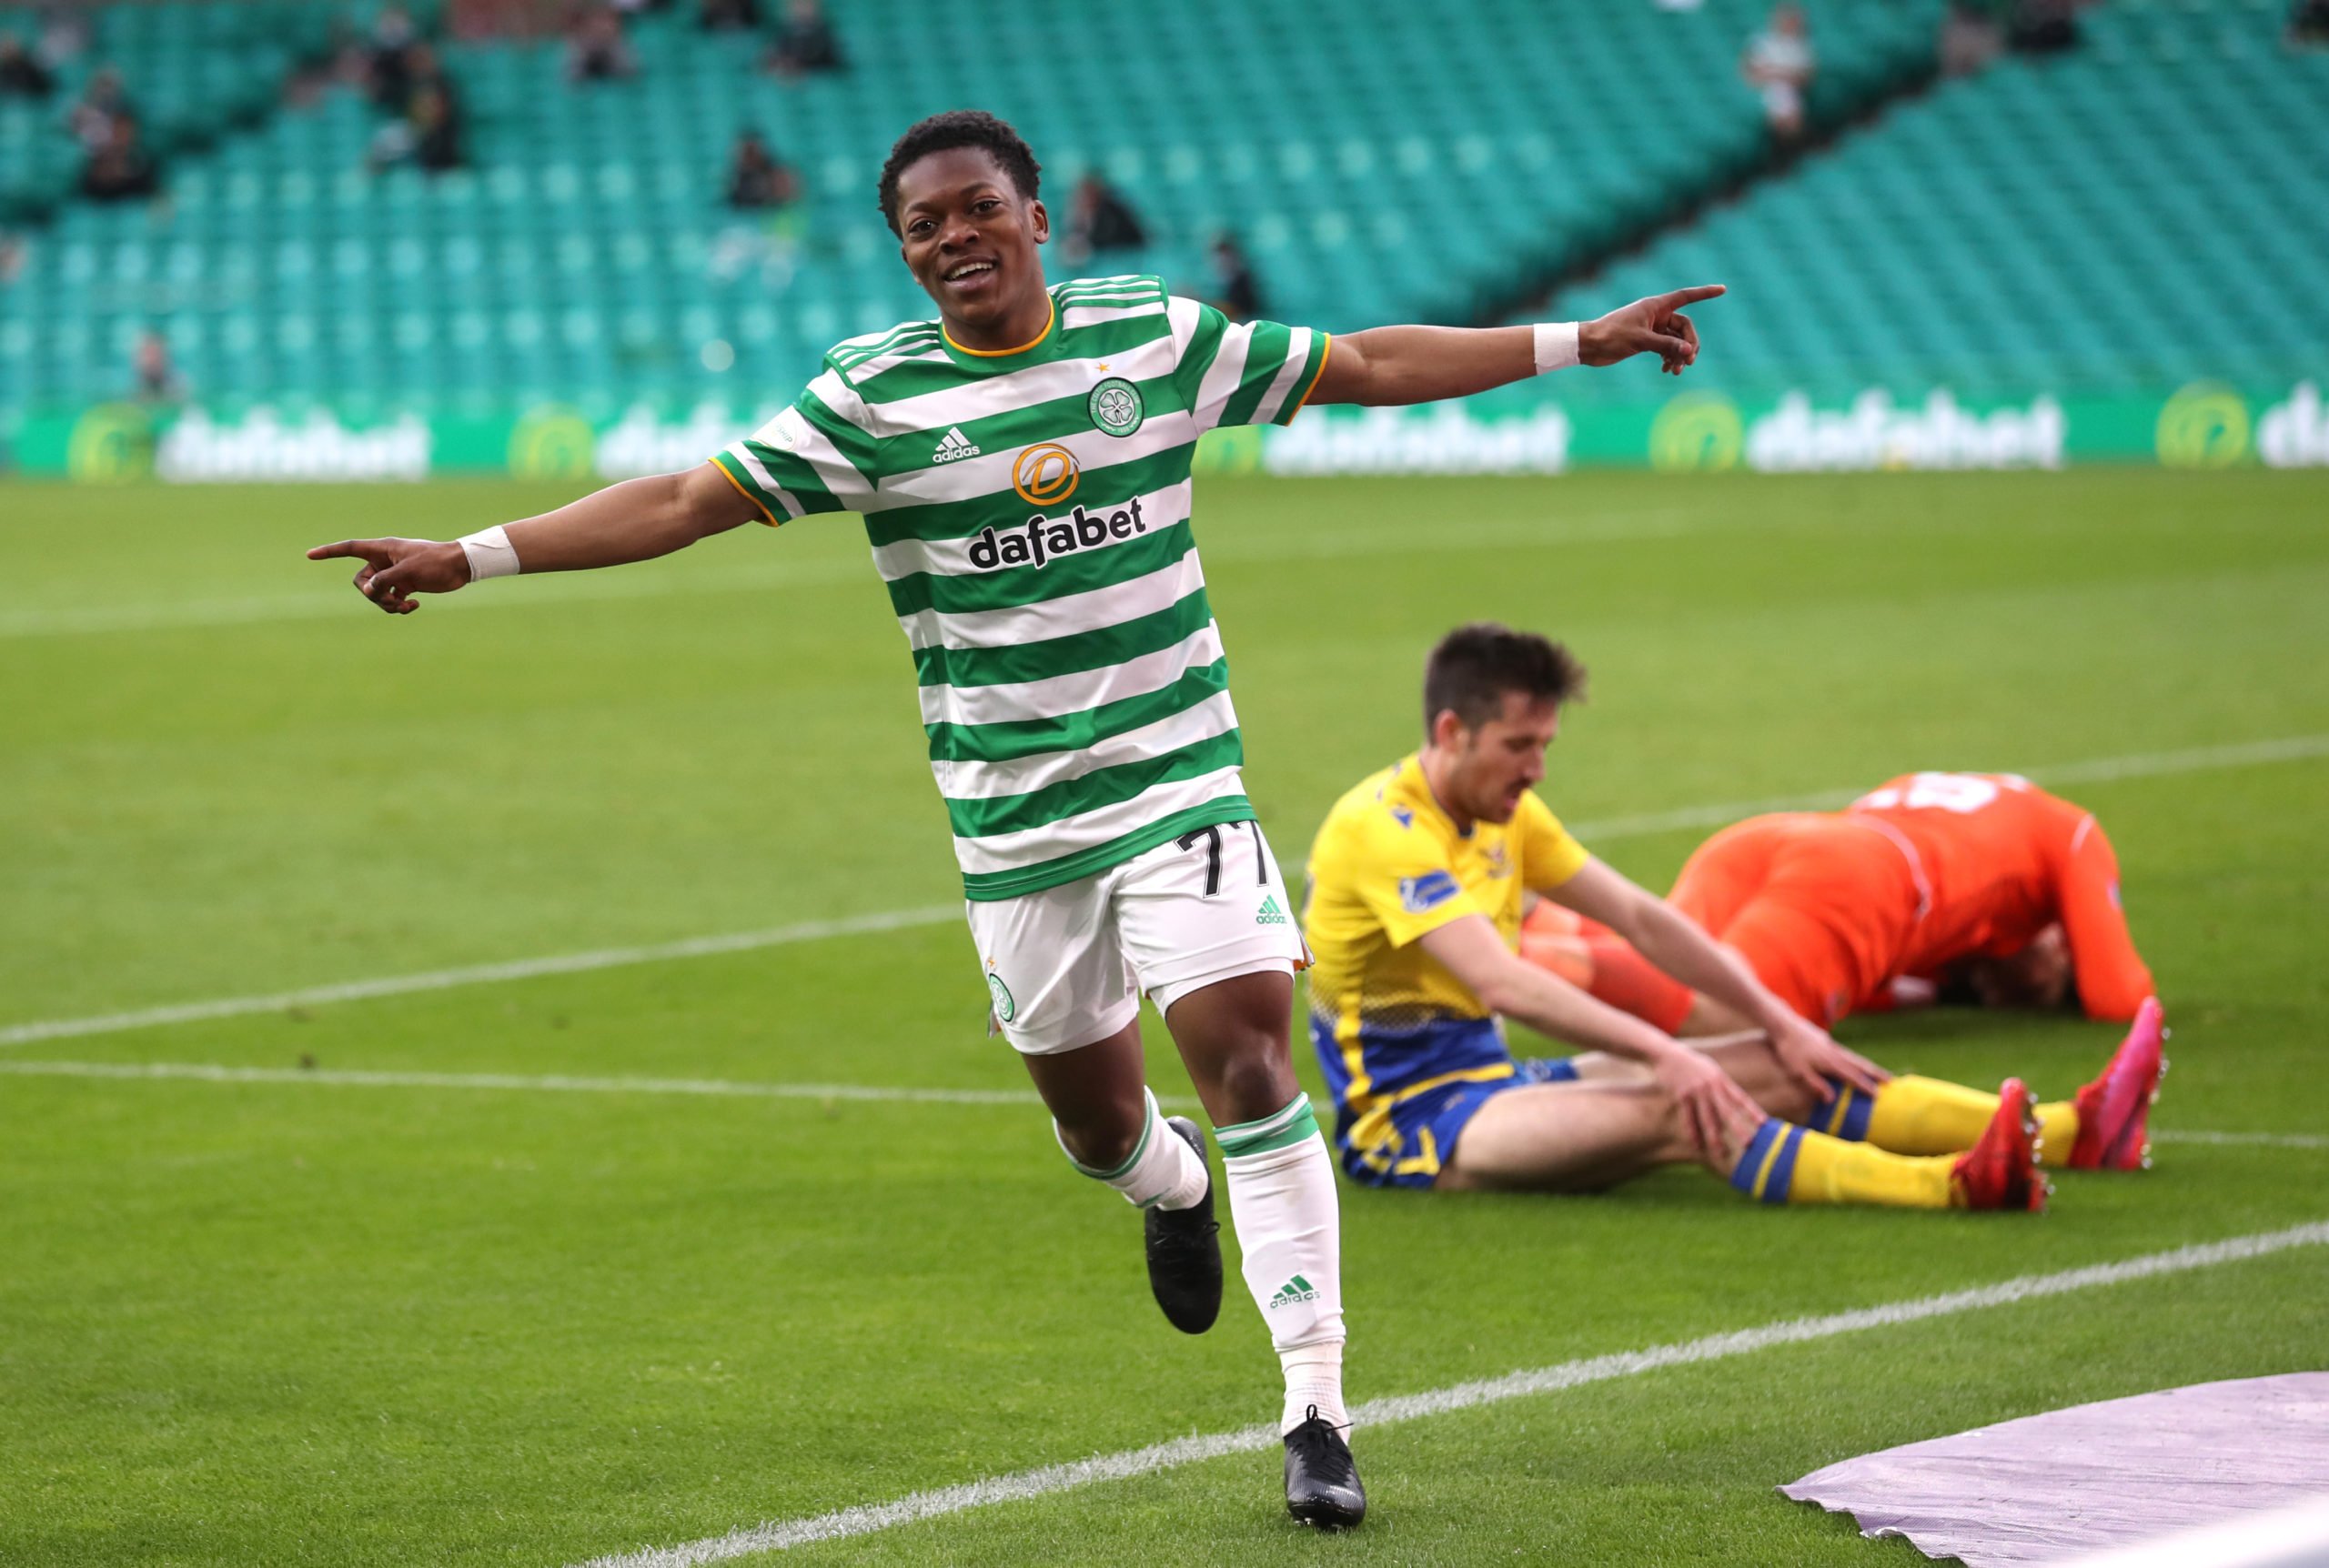 Celtic youngsters may hold key in team rebuild